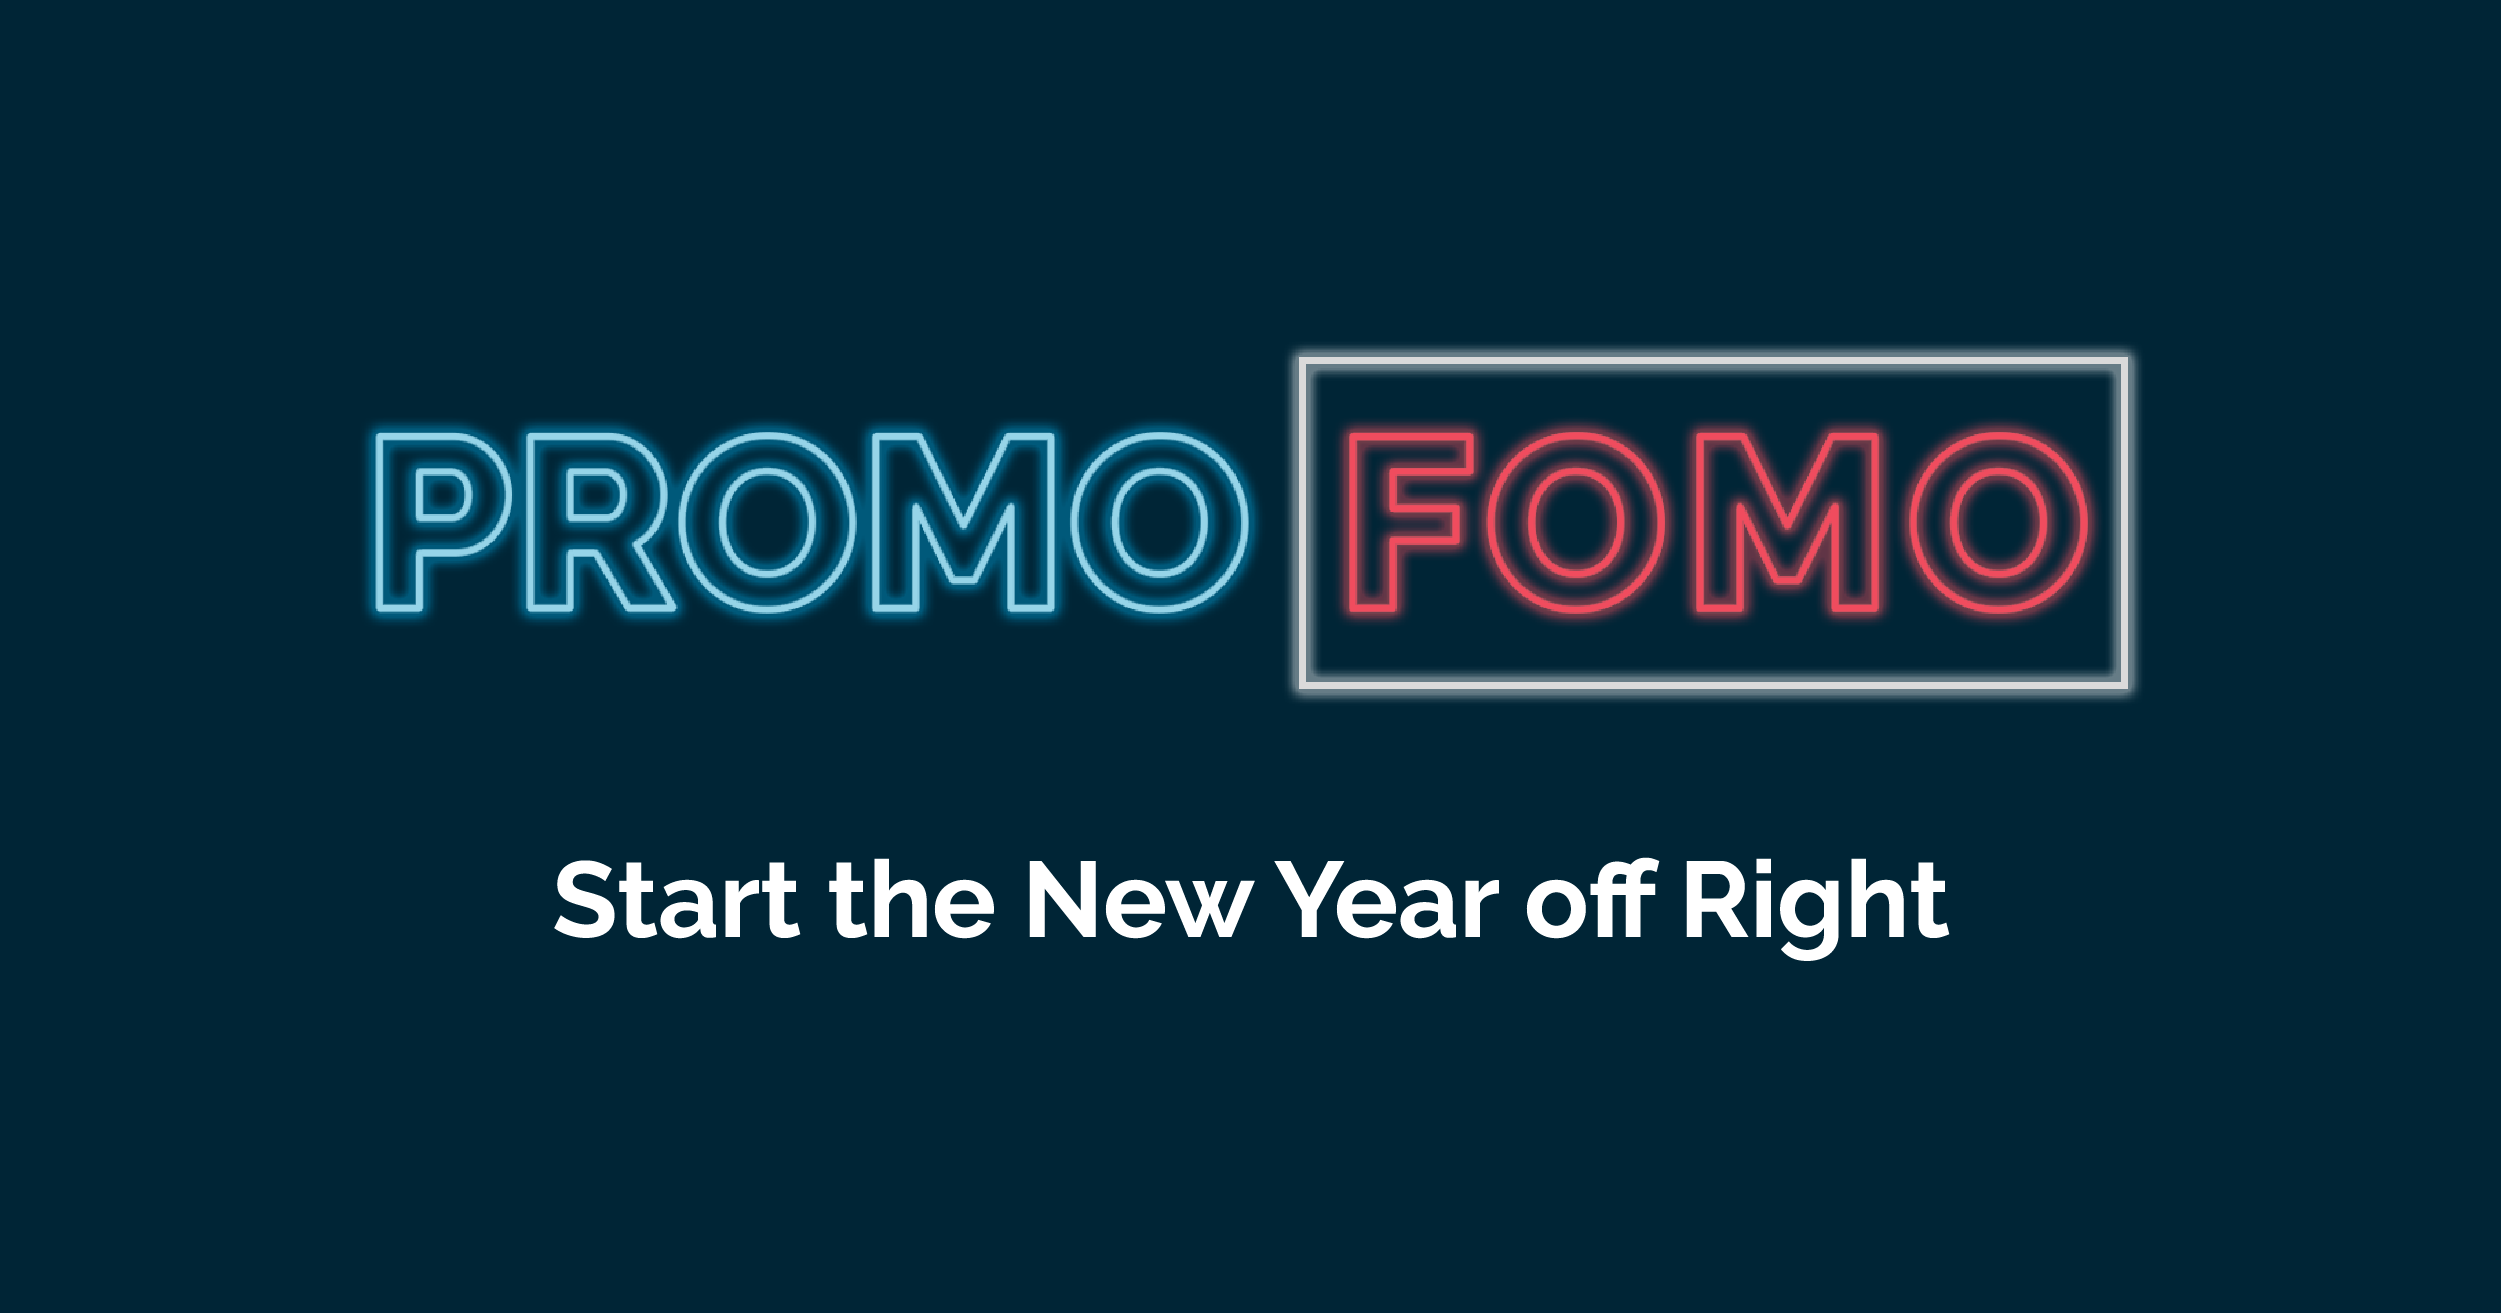 Promo FOMO: Start the New Year off Right